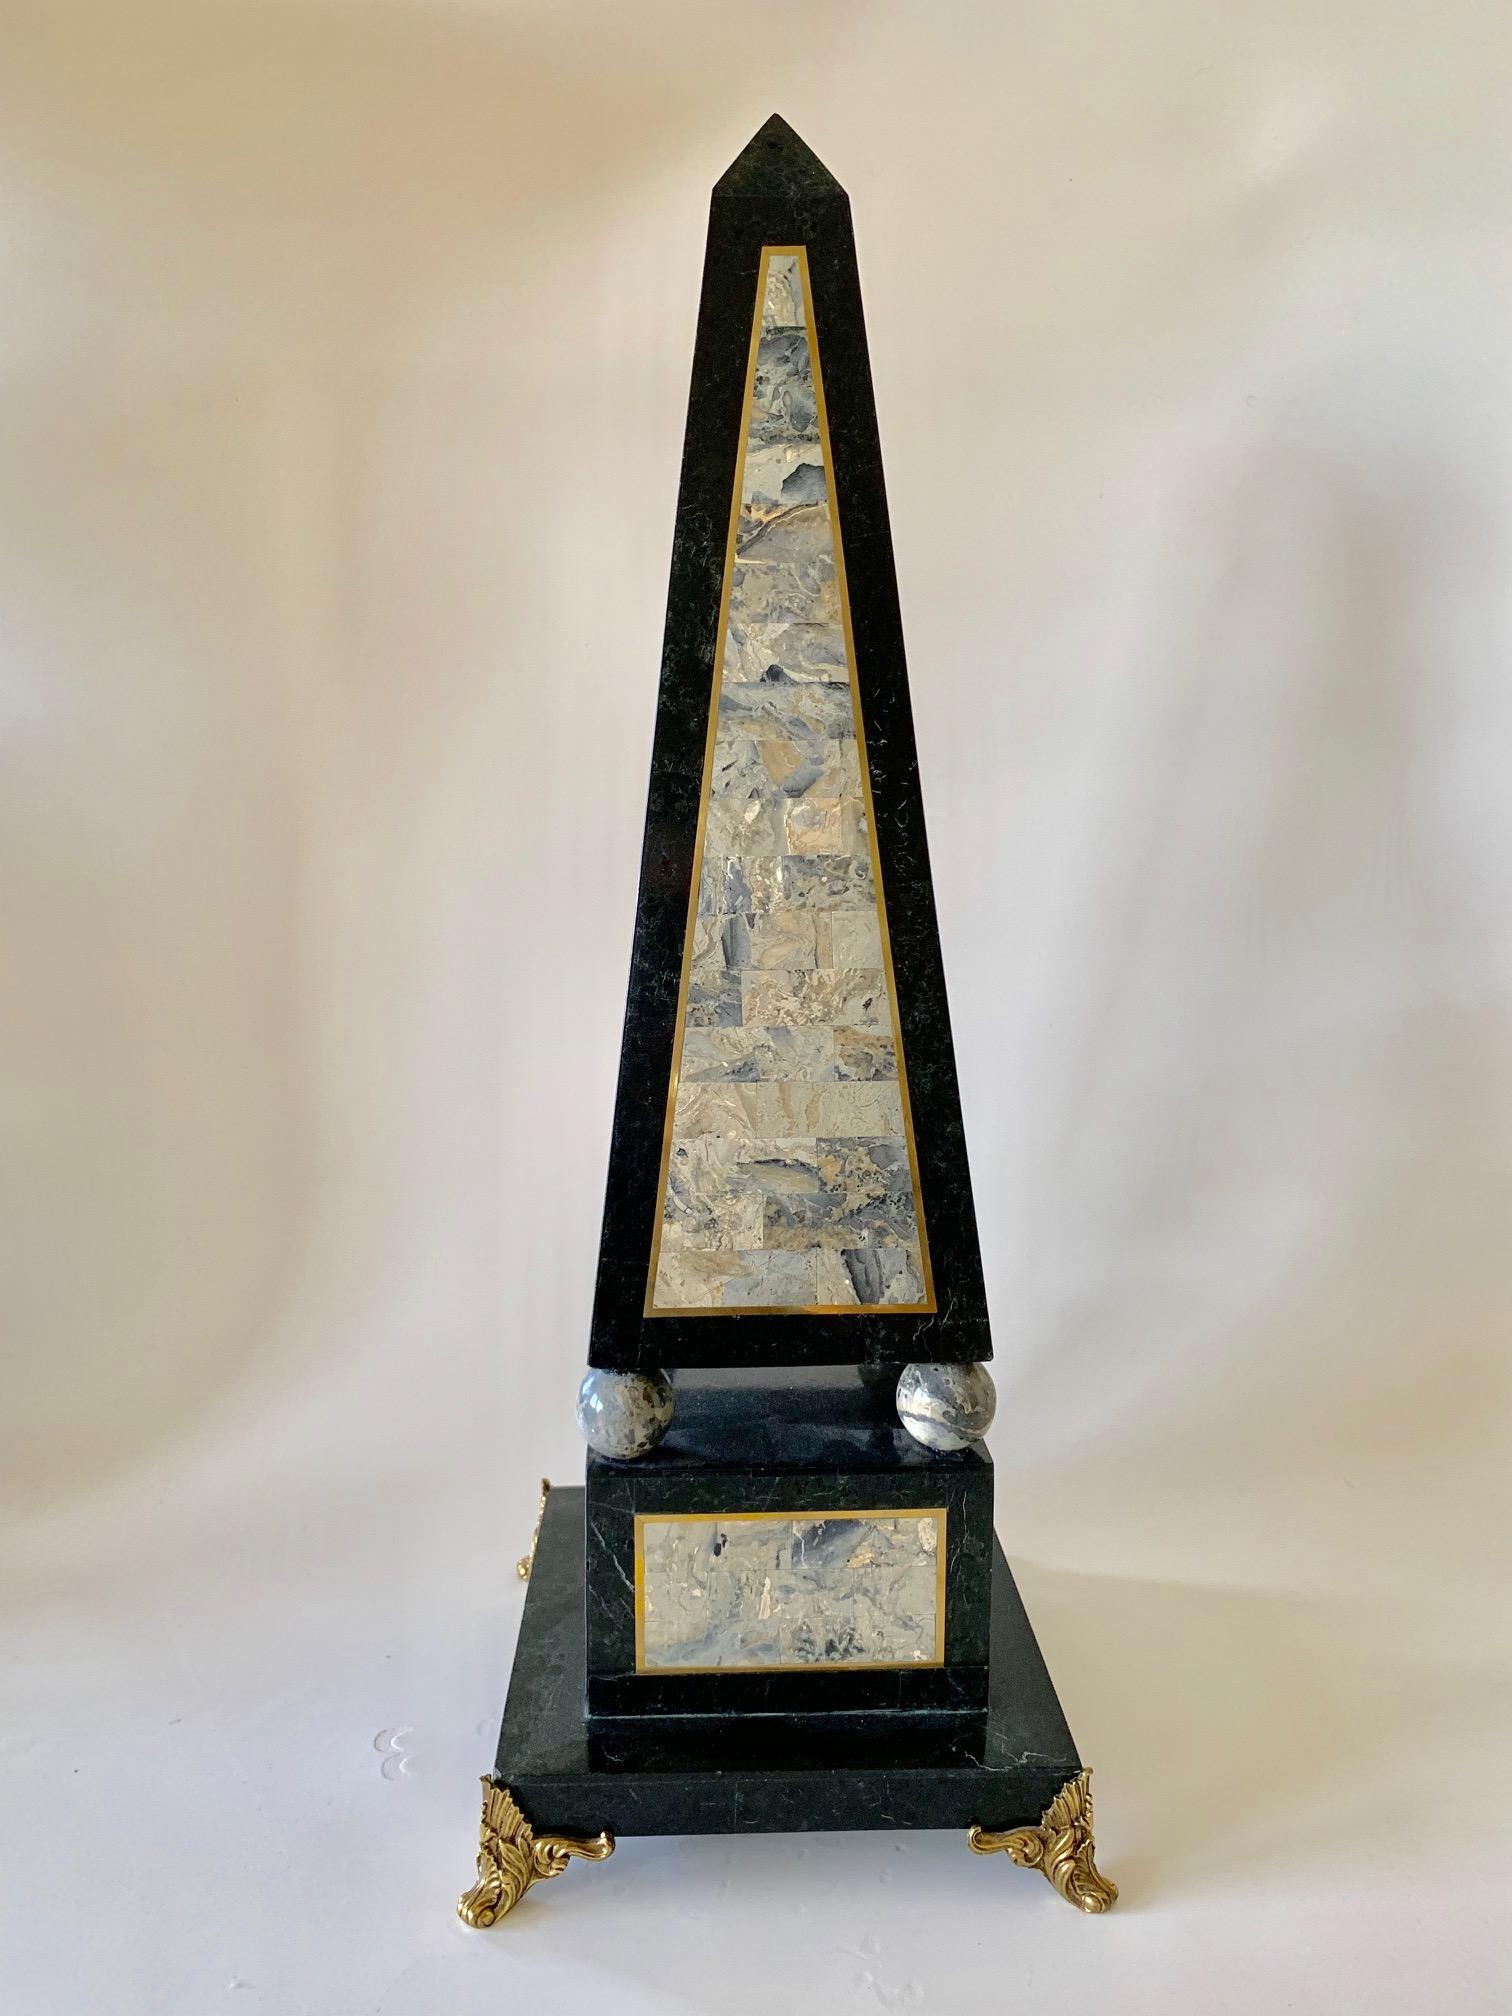 Decorative Maitland Smith tessellated black marble obelisk circa the 1980s, comprised of a mixture of tessellated colored marble. The decorative center features hues of greys which are outlined in gold emphasizing the architectural geometric pattern